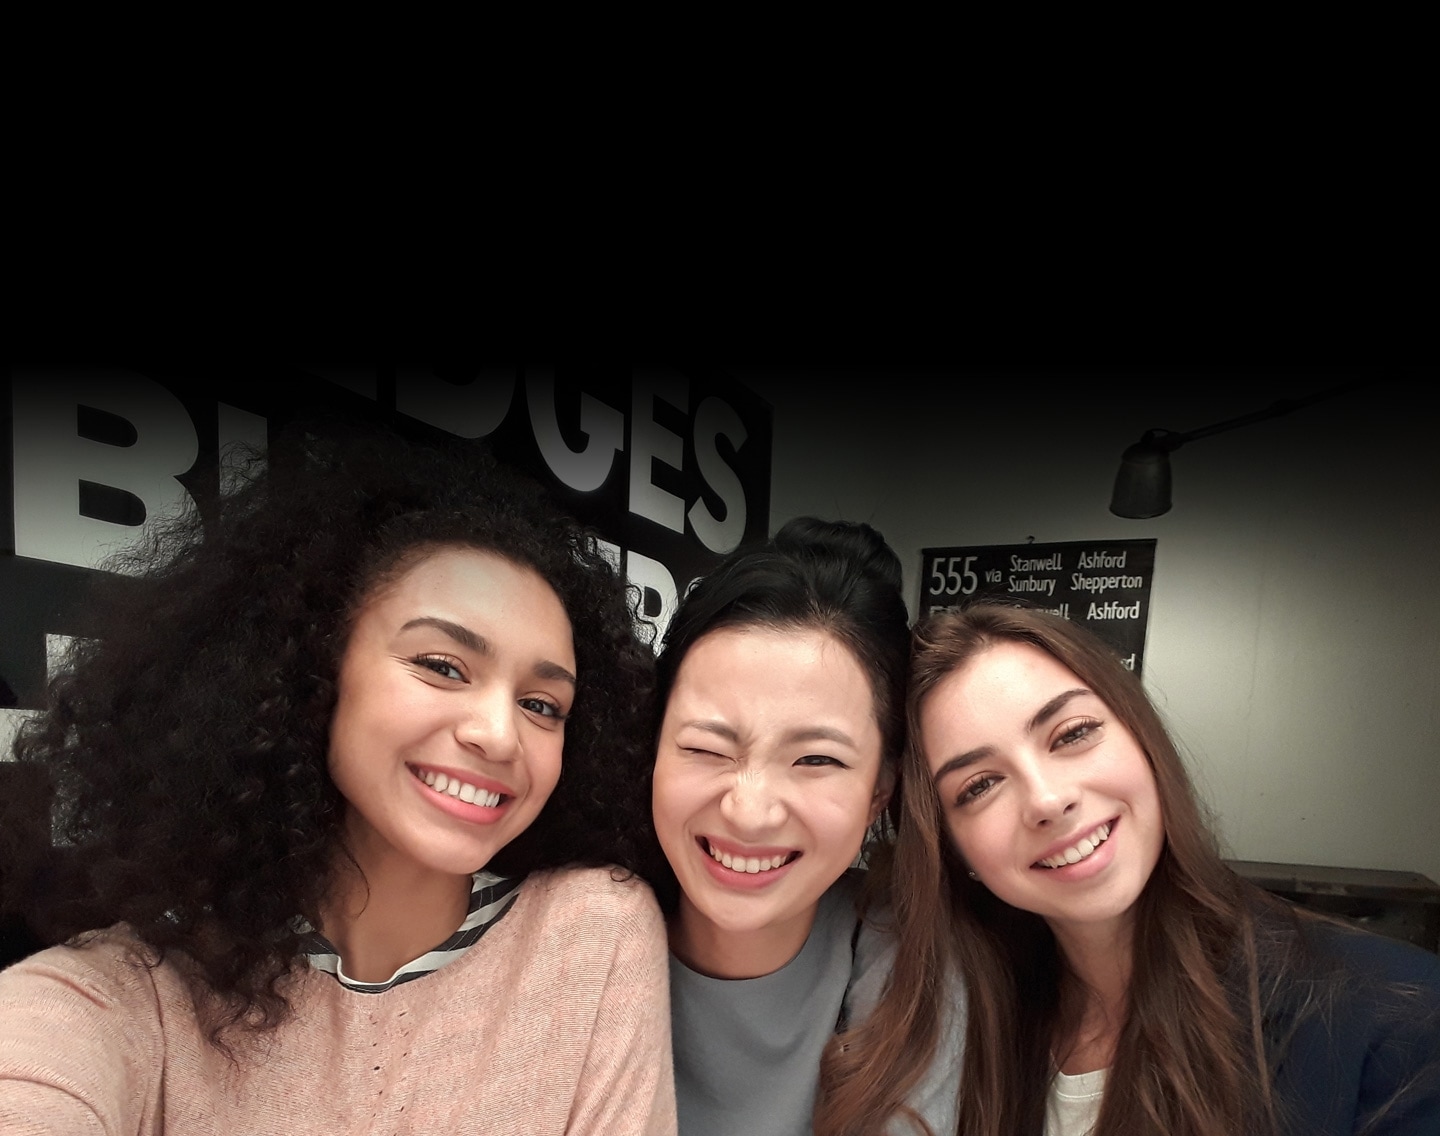 Selfie image of three women taken in low-light to show the advanced camera functionality of the Galaxy A3 (2017).